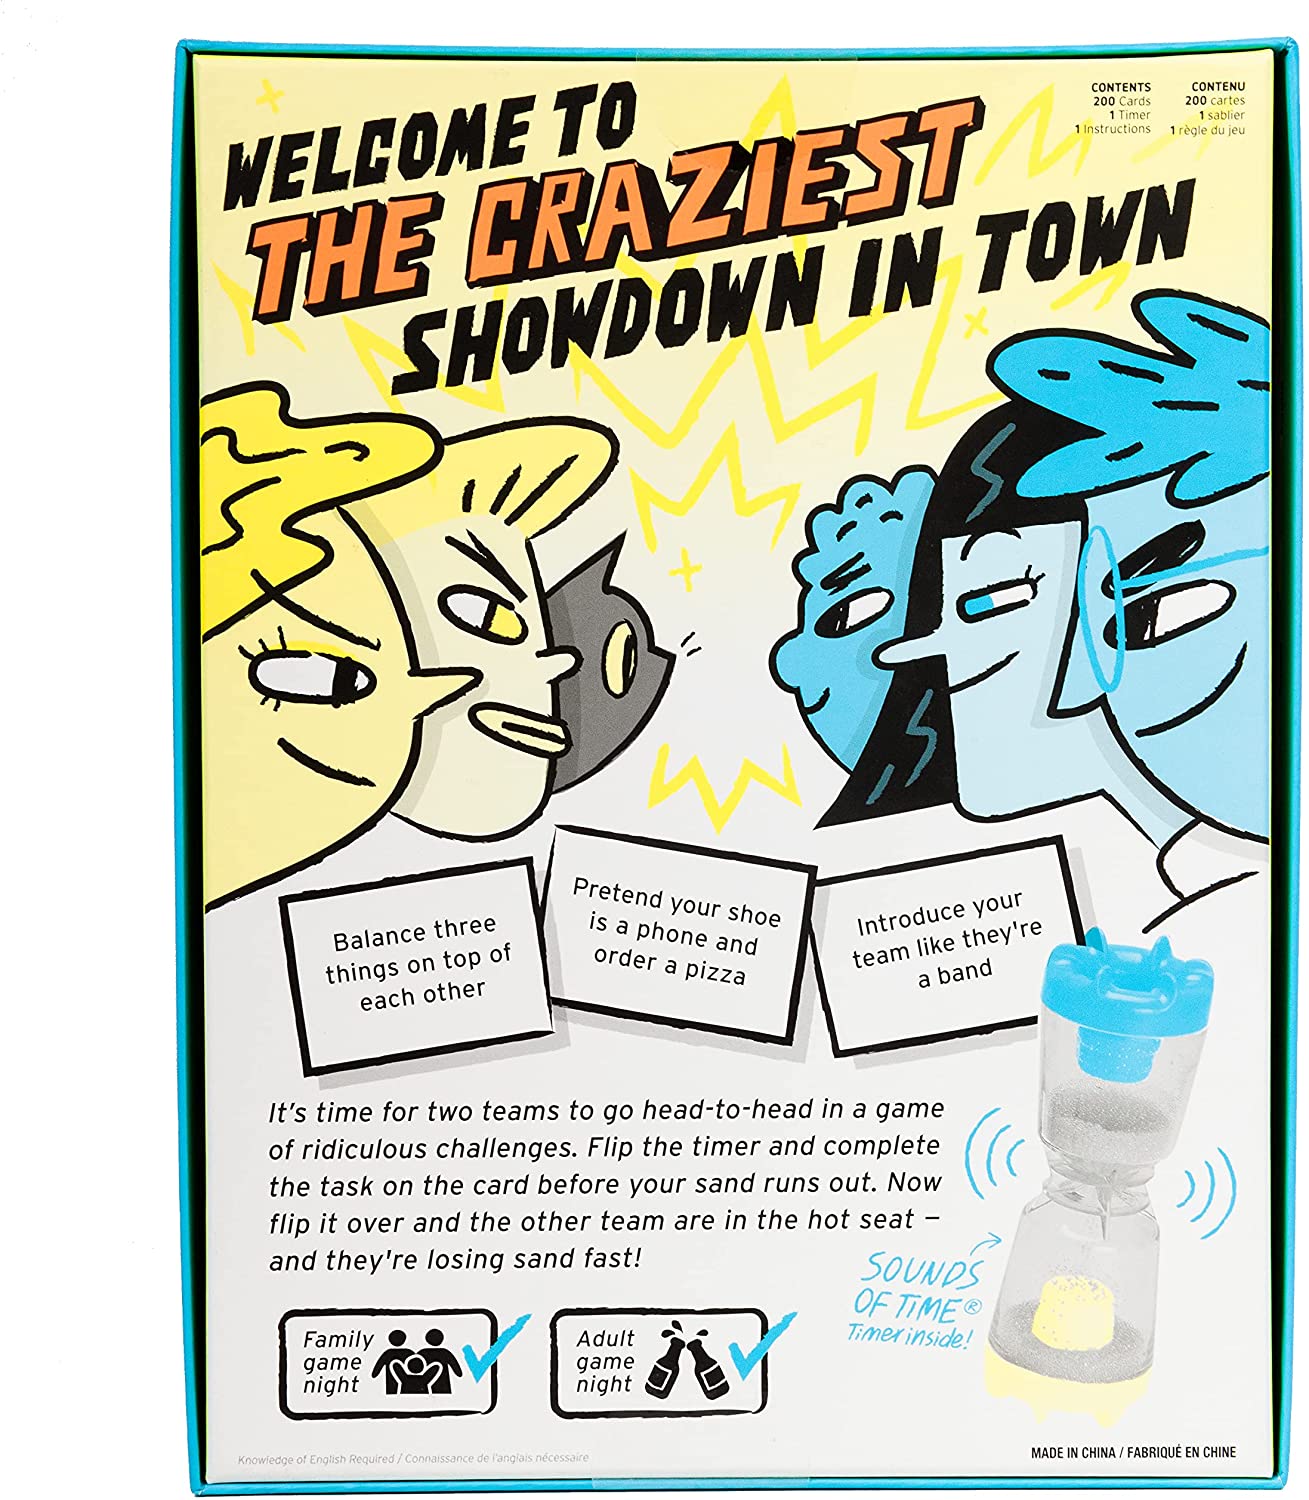 20 Second Showdown Party Game